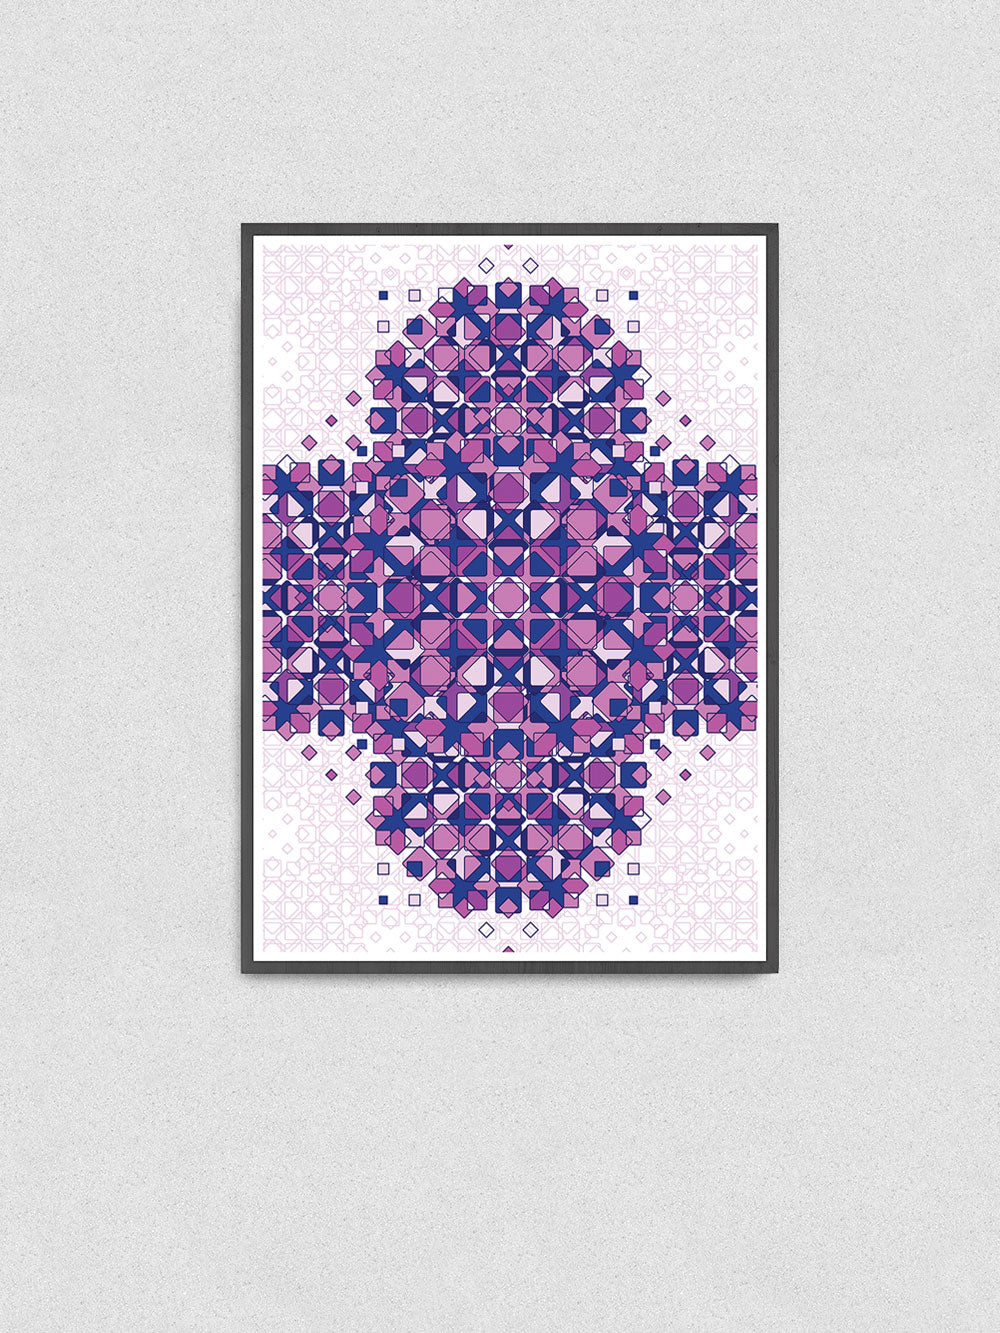 Glass Symmetry Art Print in a frame on a wall